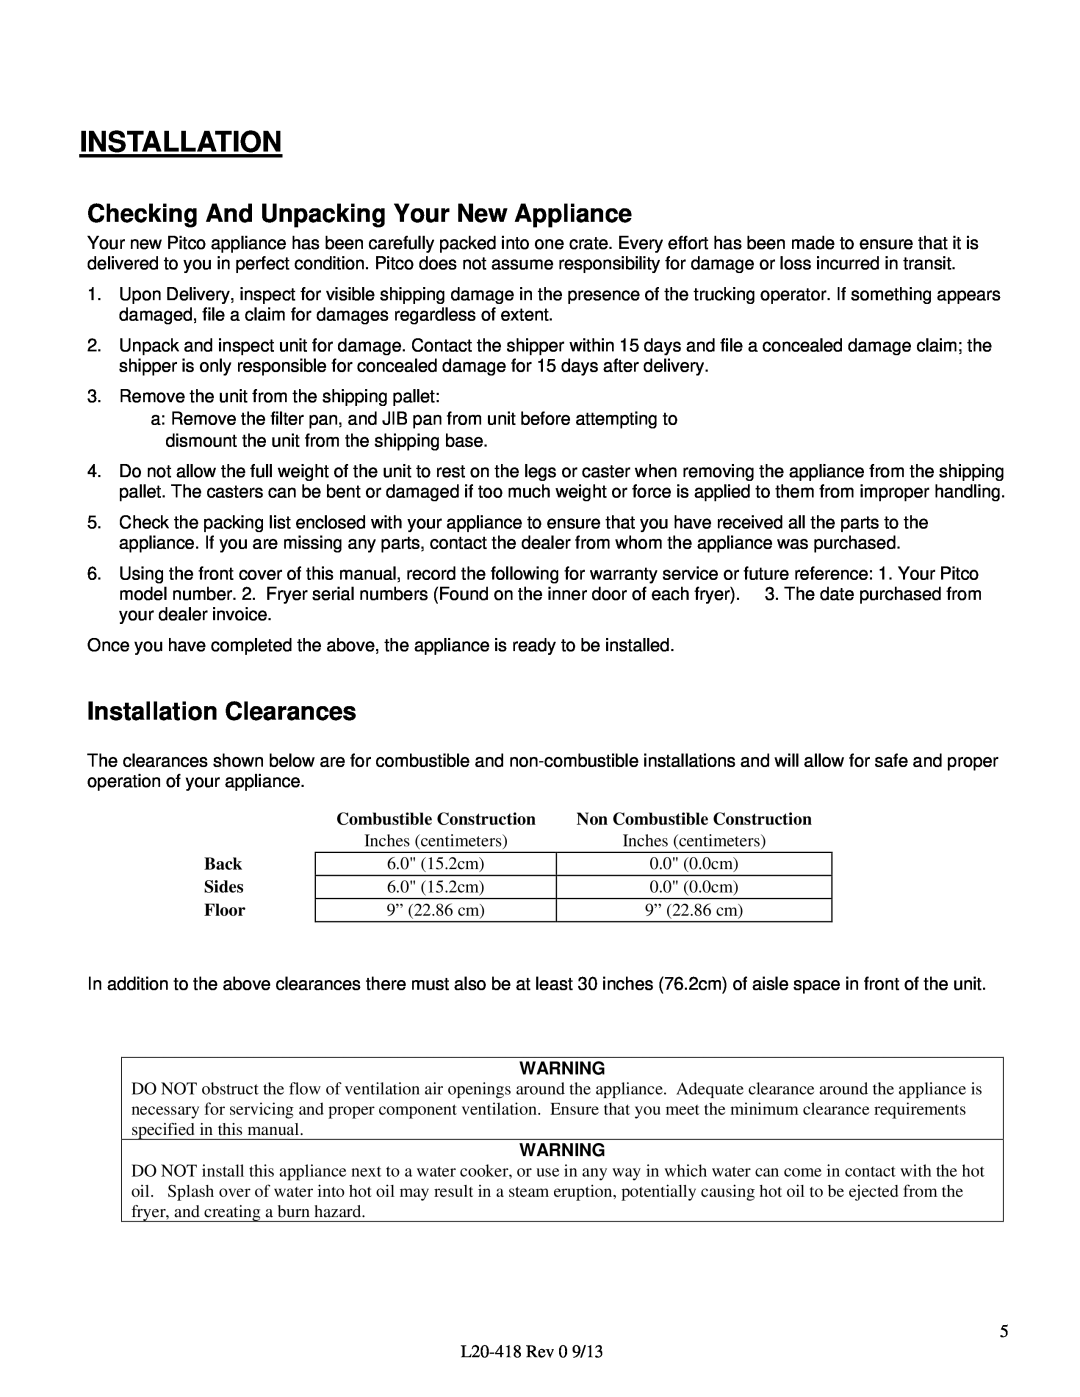 Pitco Frialator VF35 operation manual Checking And Unpacking Your New Appliance, Installation Clearances 